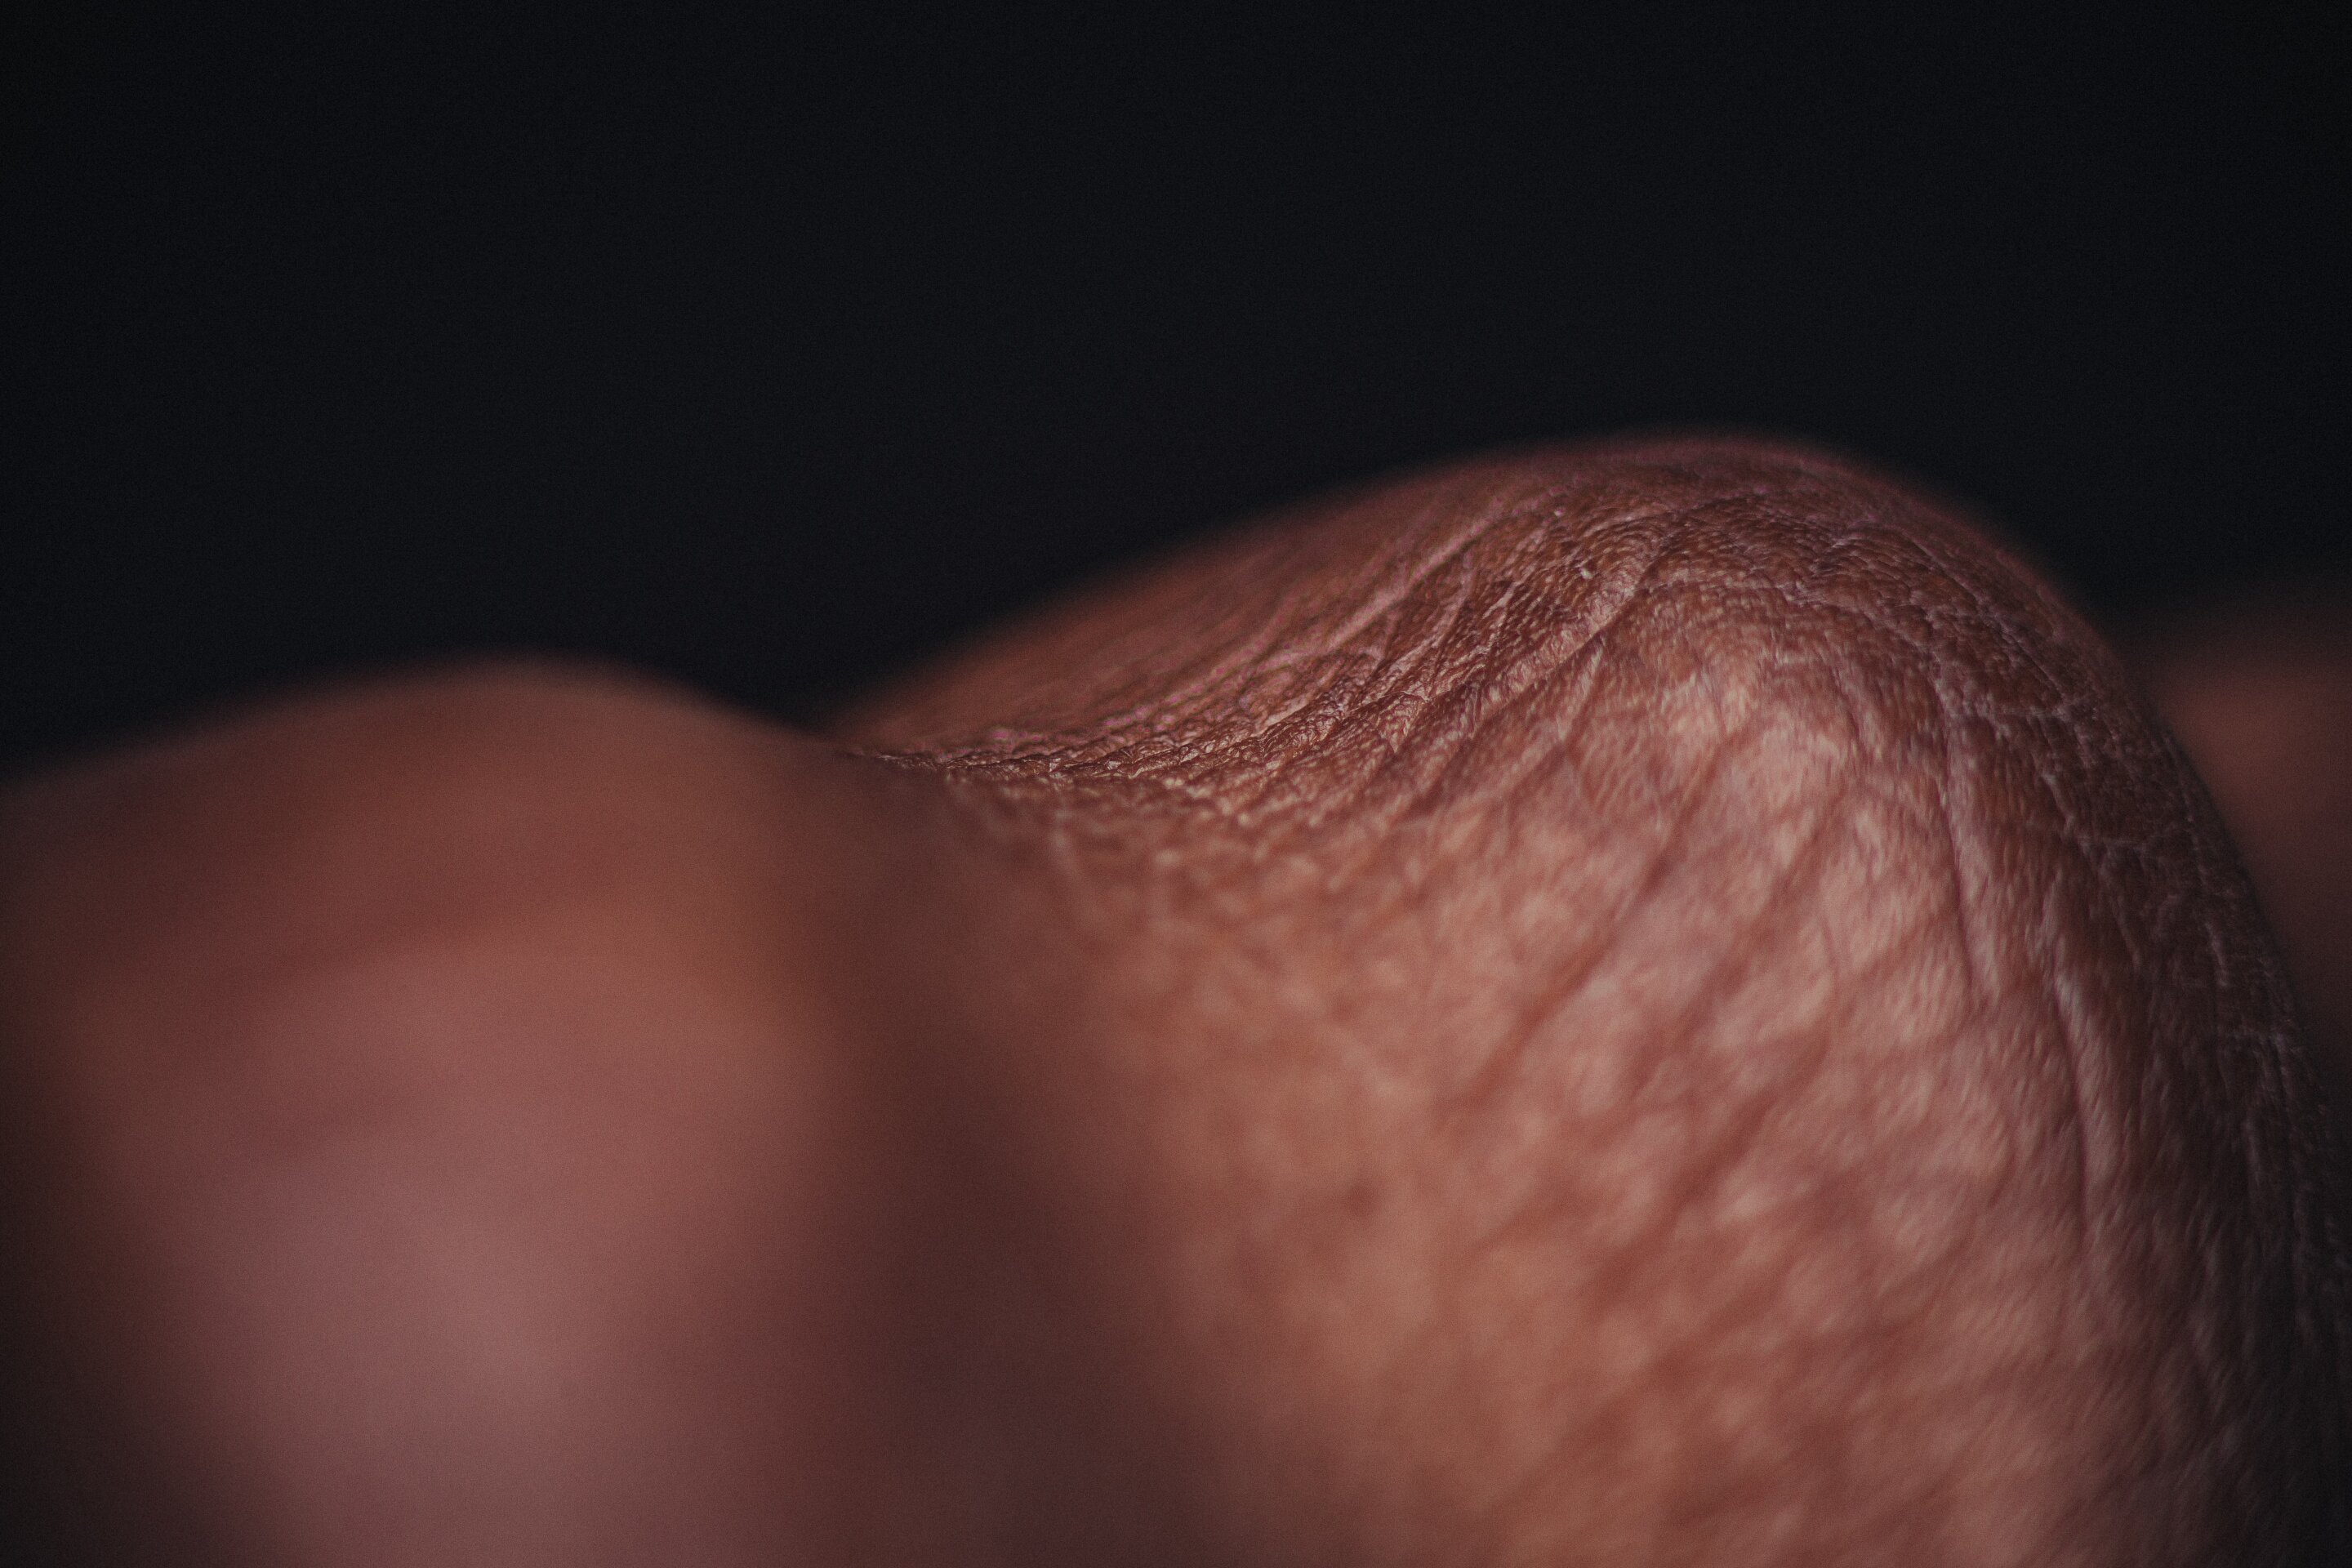 Can artificial skin go beyond the sensing features of natural skin?